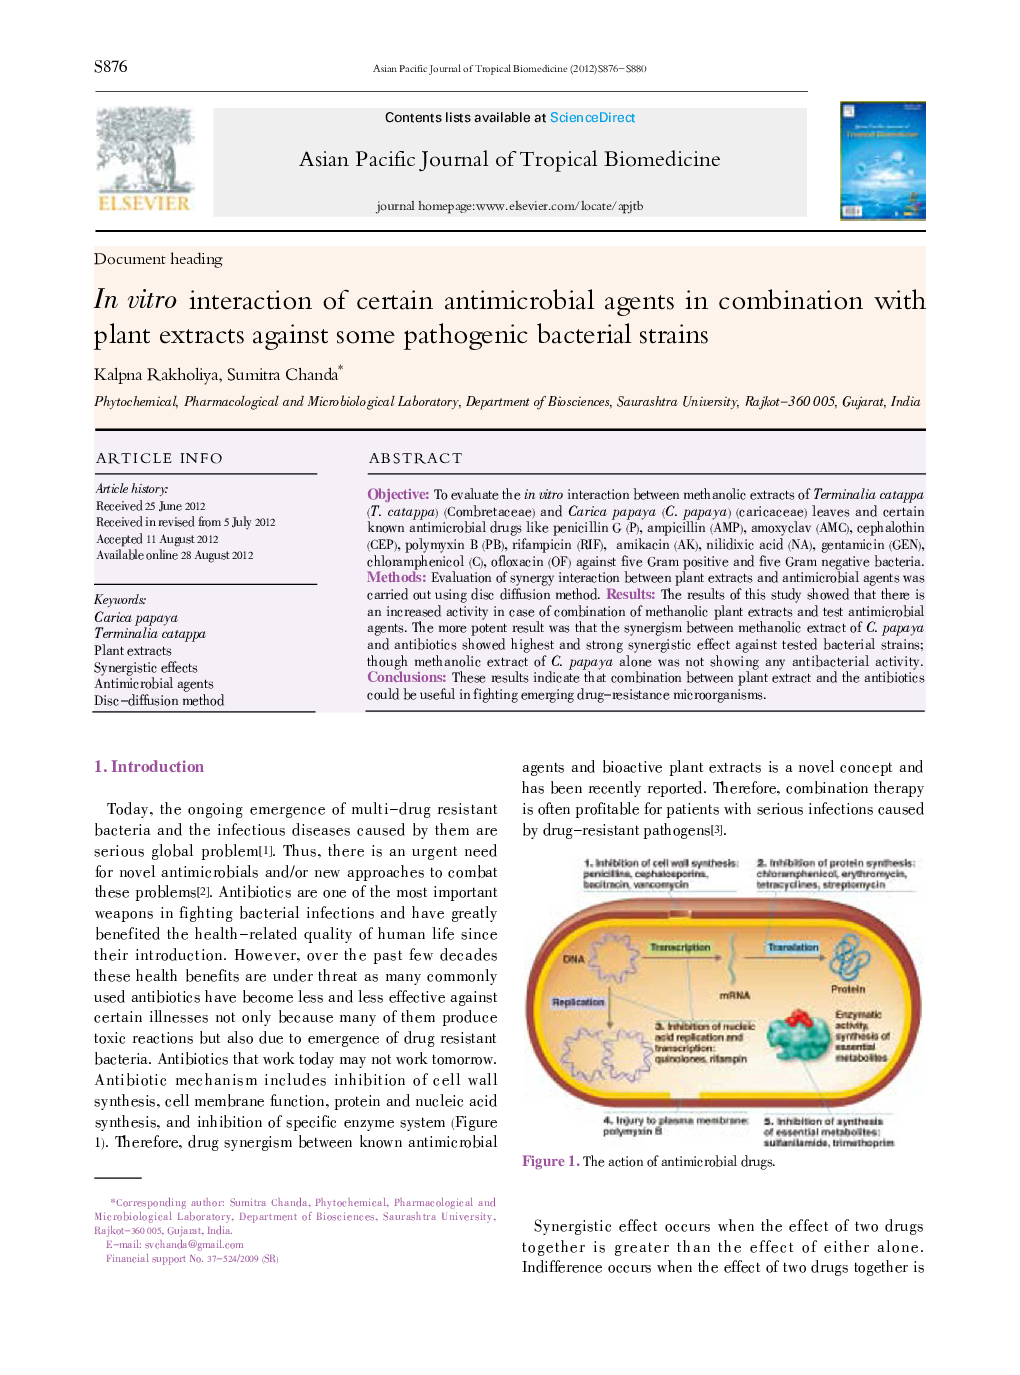 In vitro interaction of certain antimicrobial agents in combination with plant extracts against some pathogenic bacterial strains